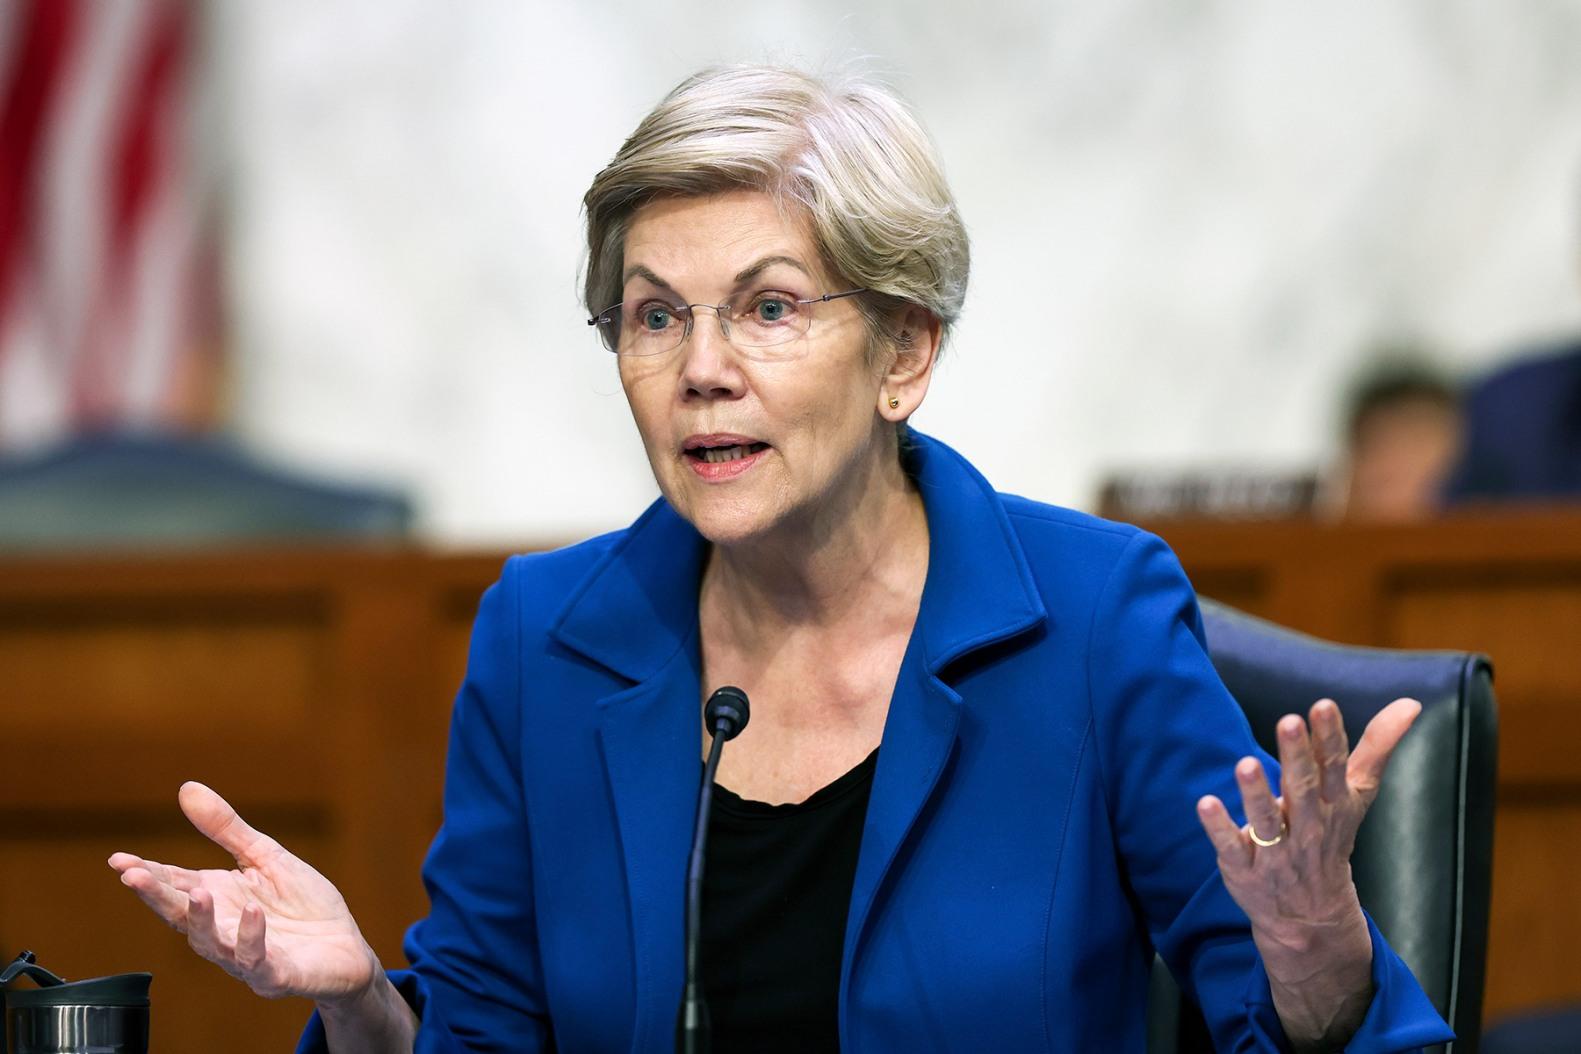 US Senator Elizabeth Warren wants to build an "Anti-Crypto Army" and strongly ban the crypto industry